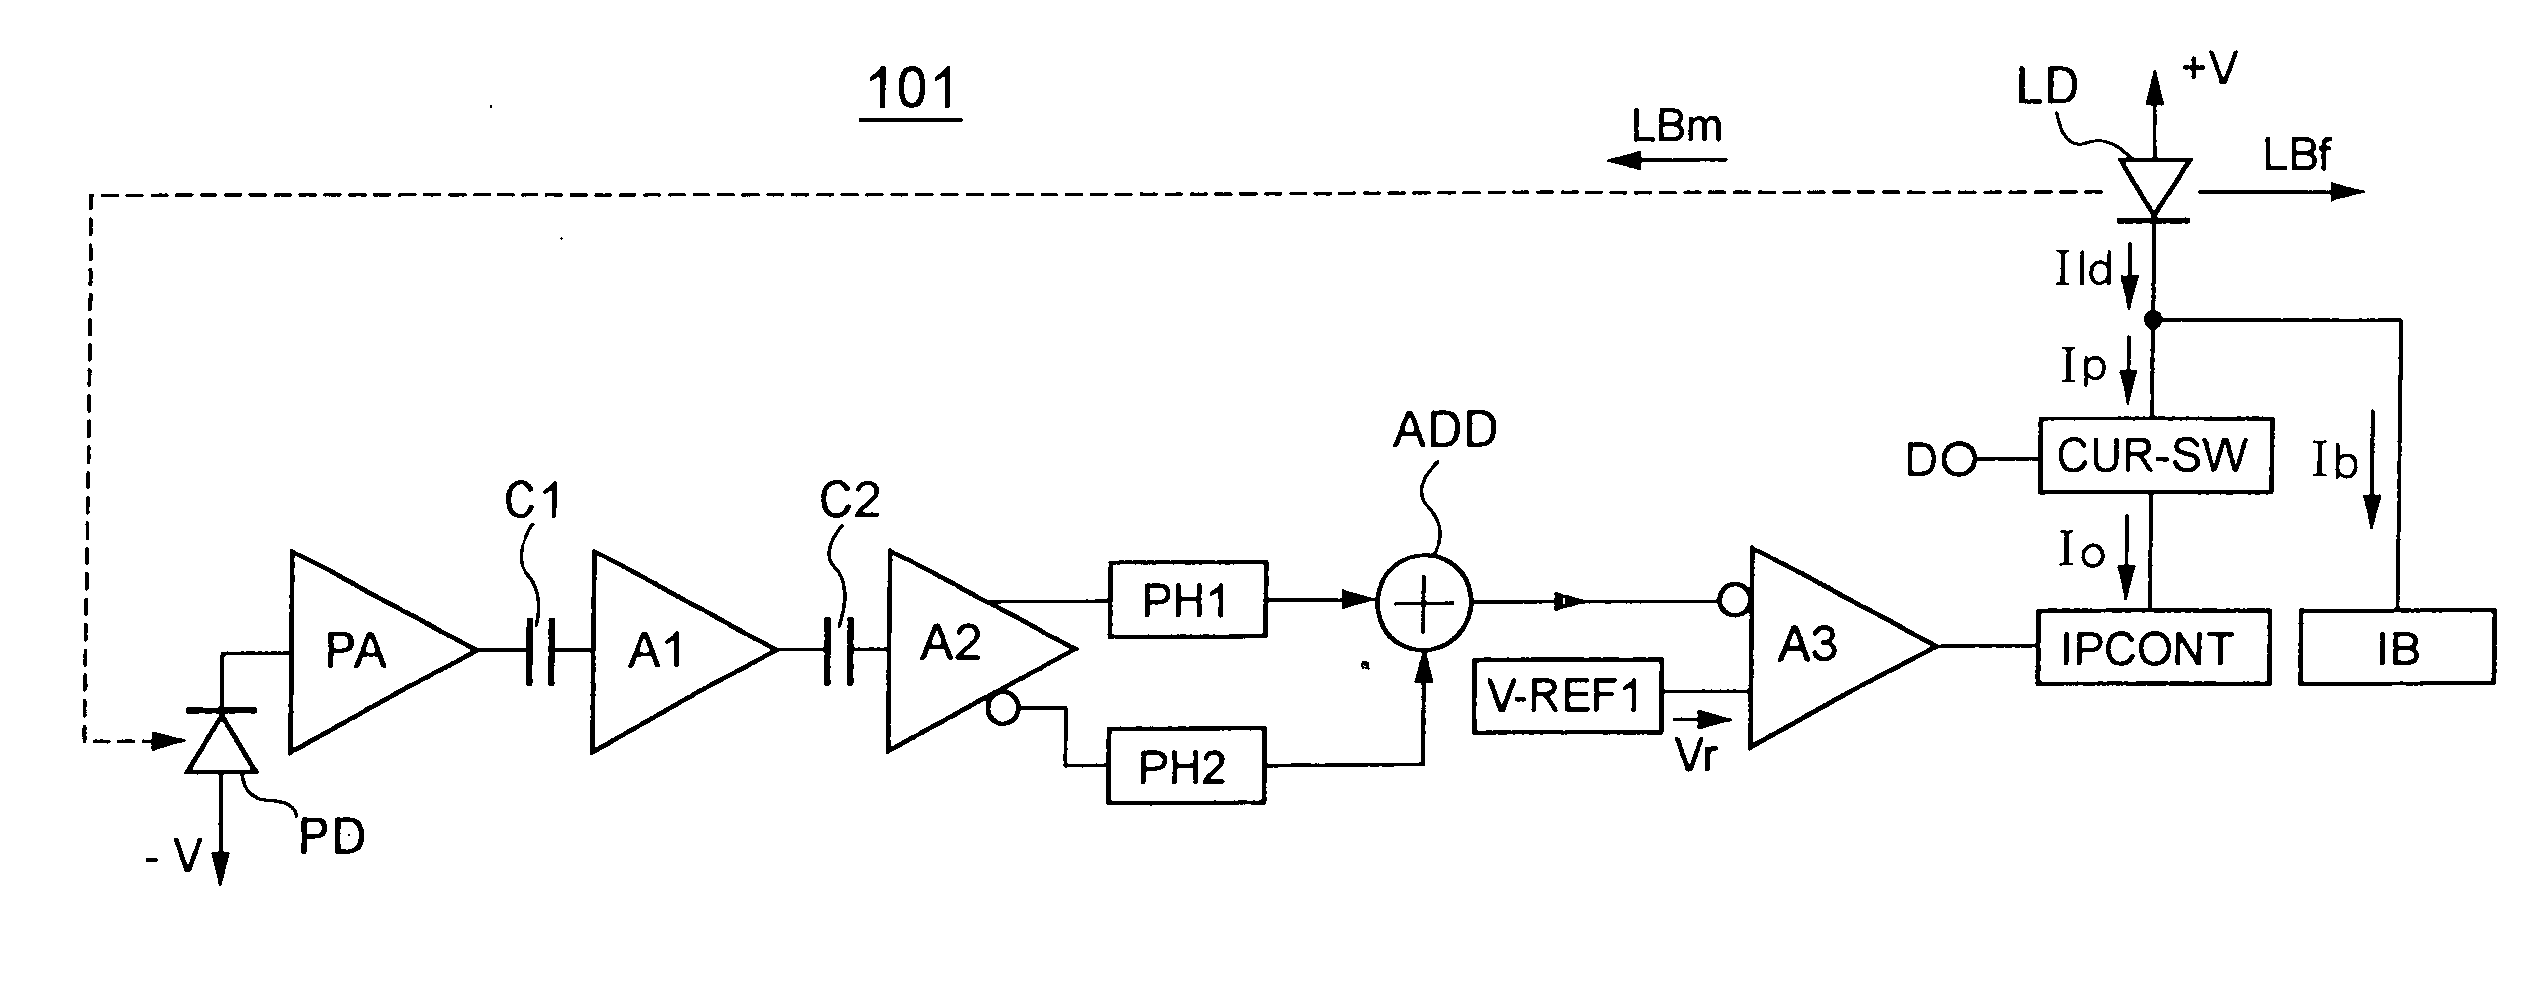 Driving apparatus of a light-emitting device